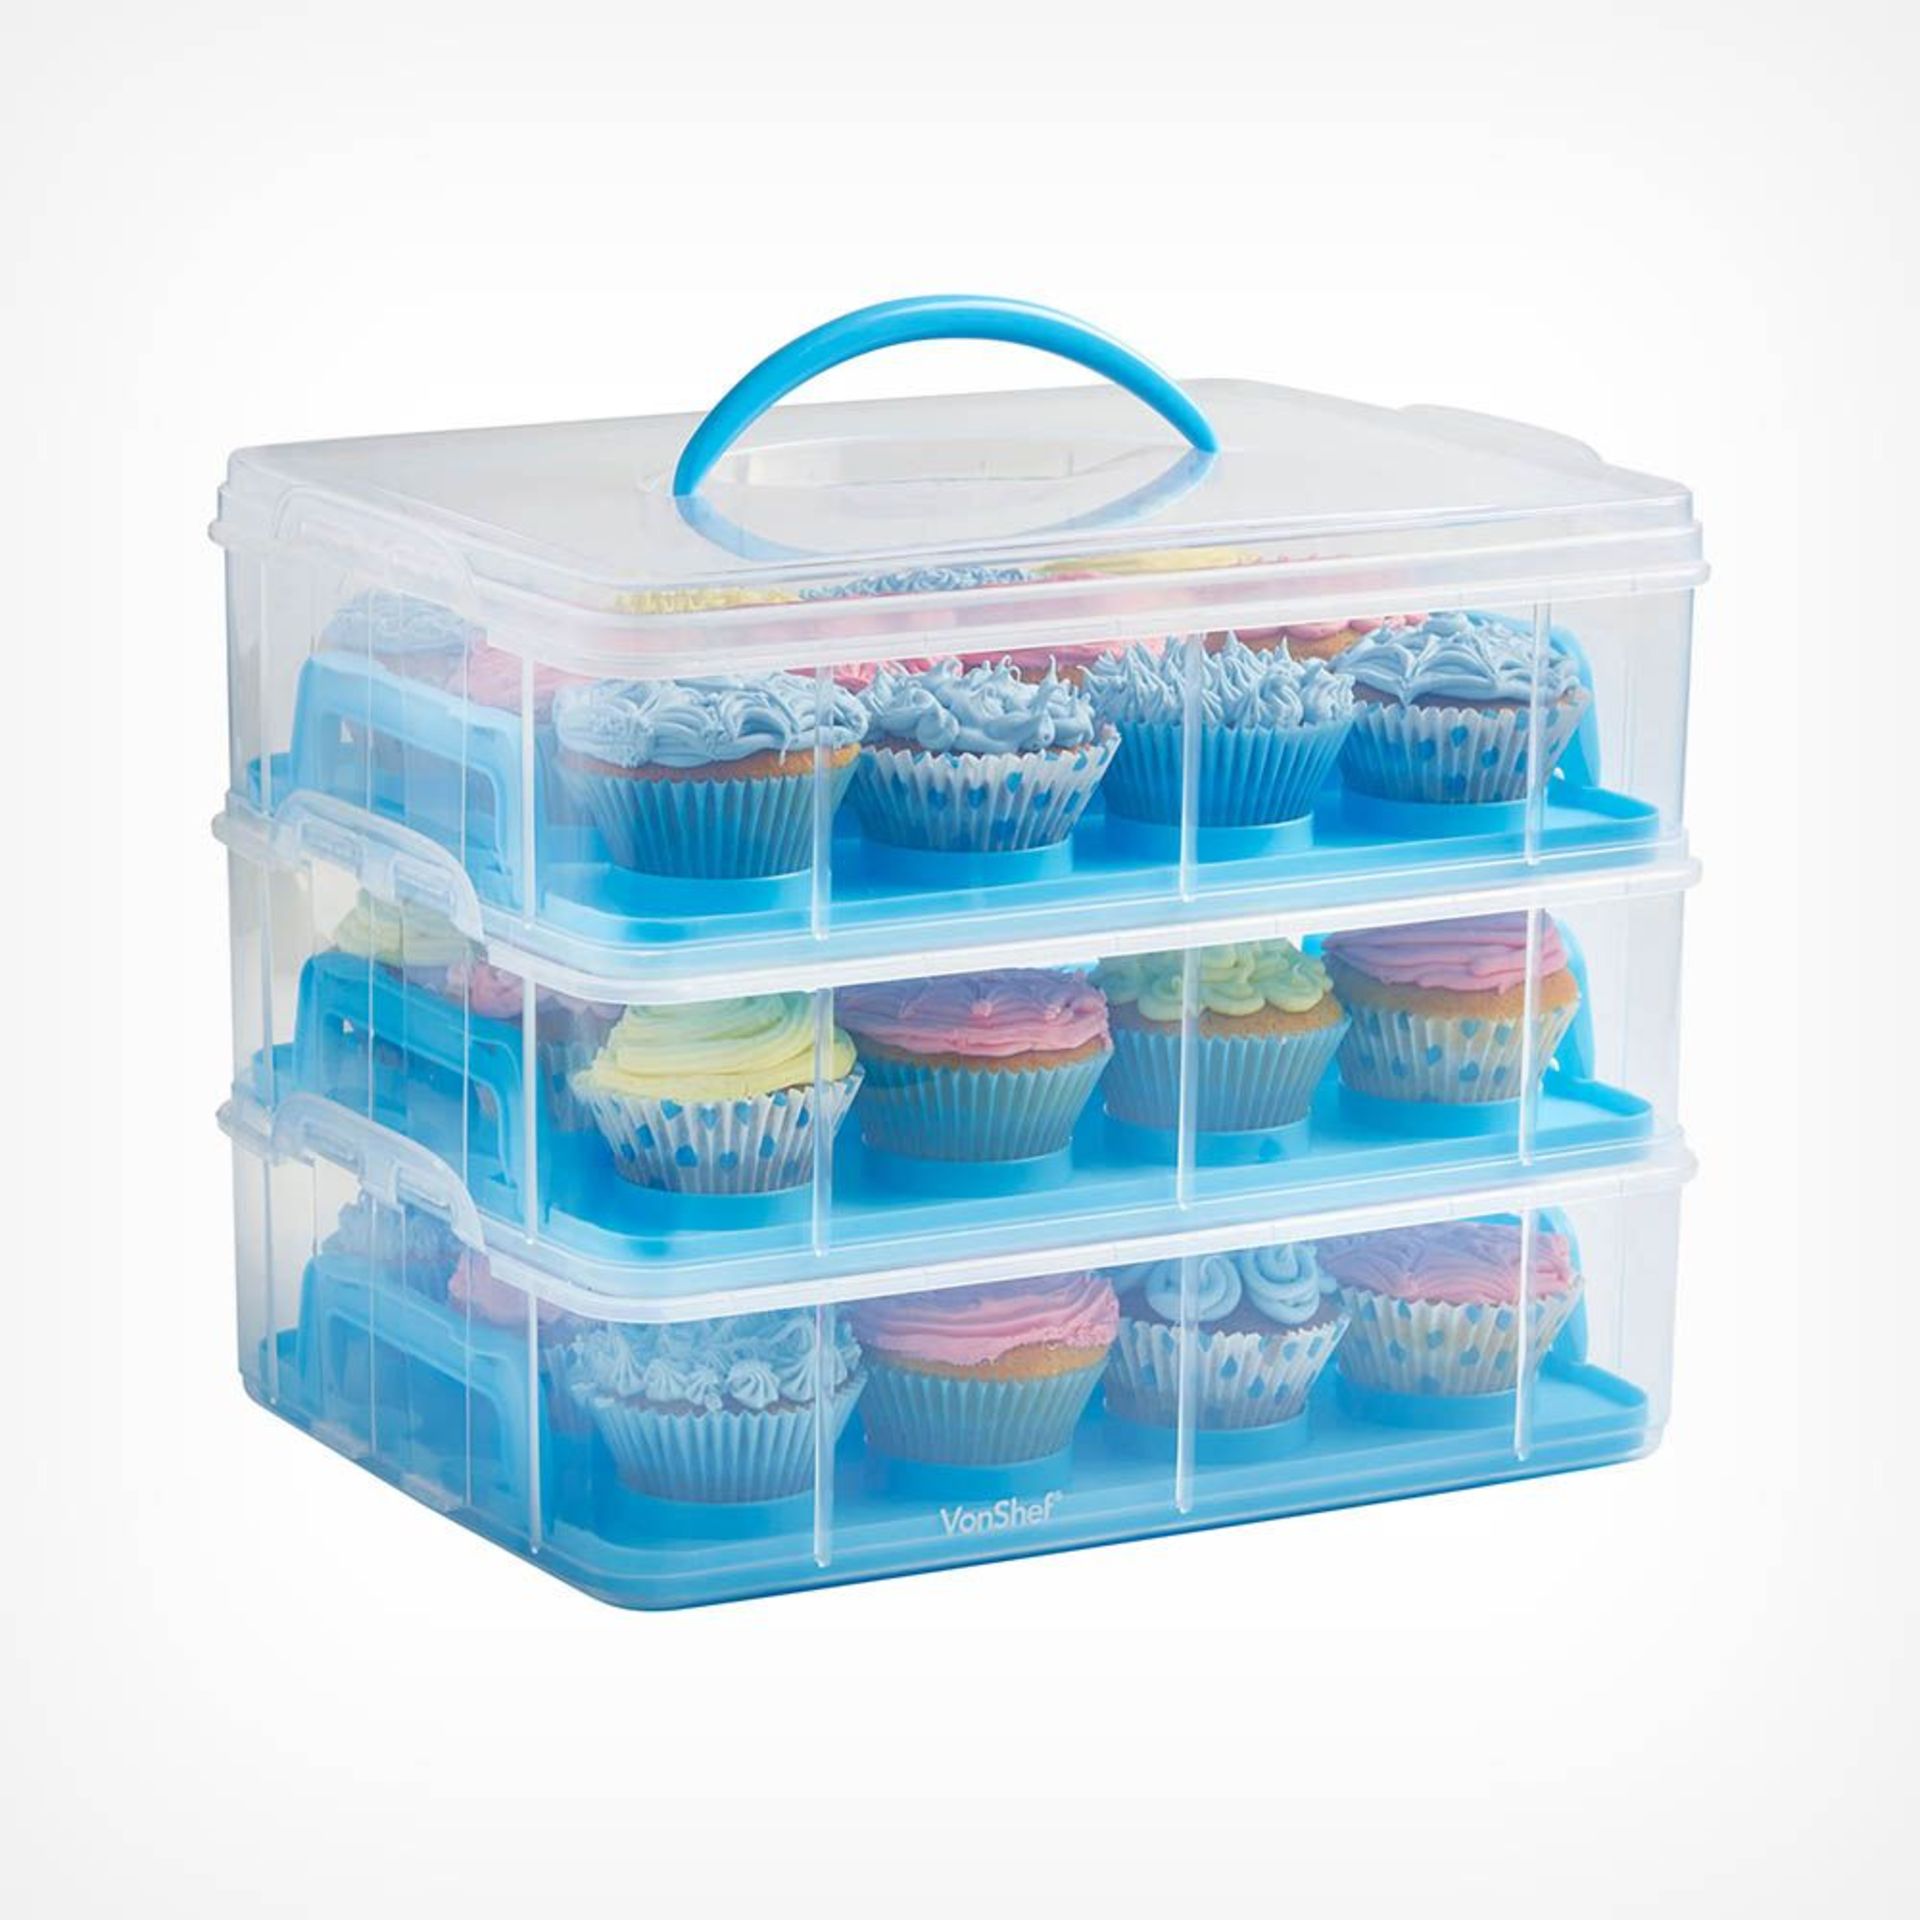 3 Tier Cupcake Carrier Blue. - BI. With this extremely handy carrier, you can store and transport up